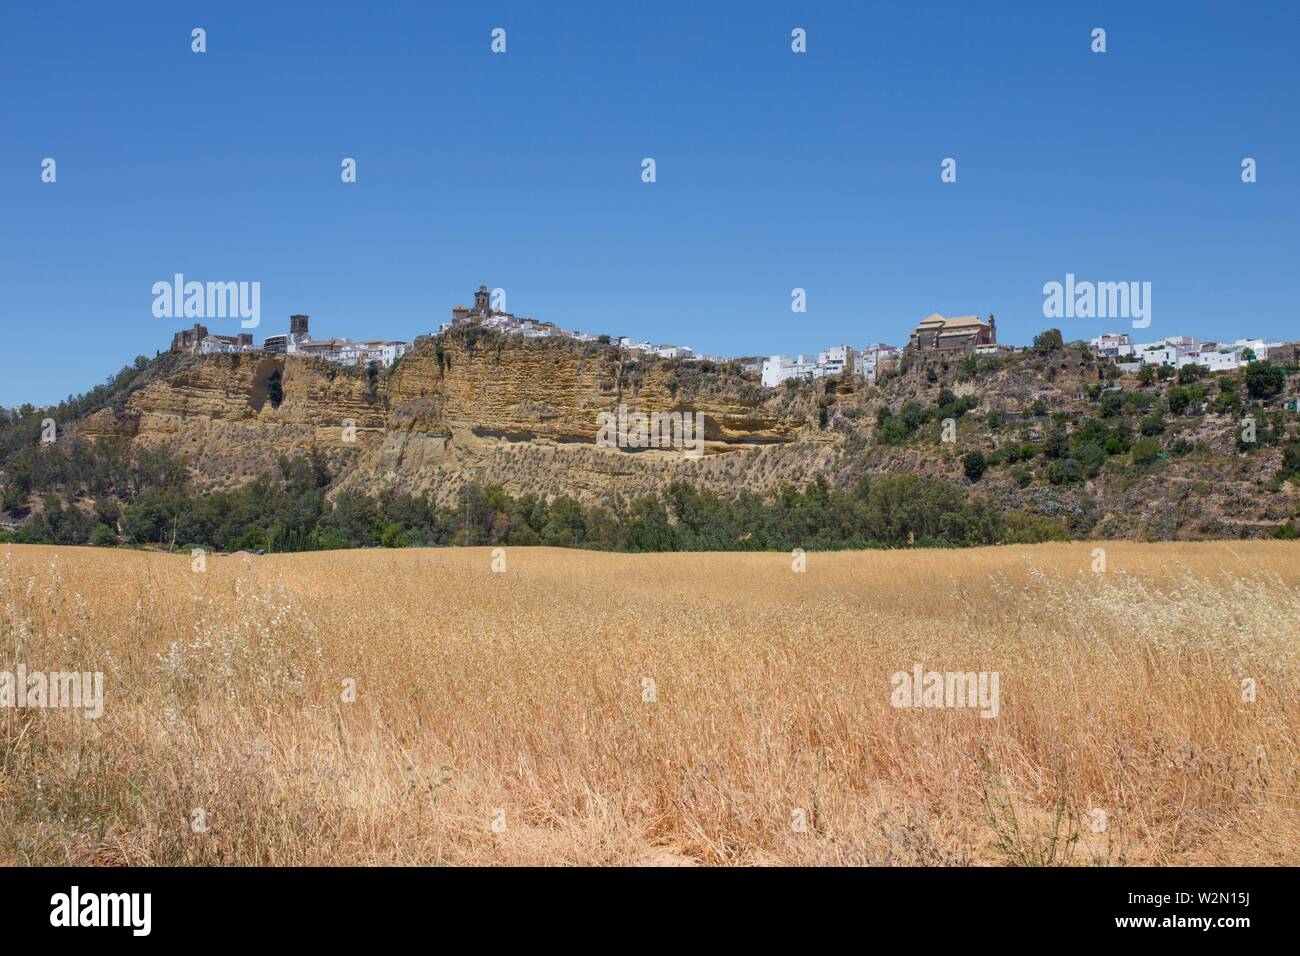 Panorama of white village Arcos de la Frontera, Andalusia, Spain. Image taken from wheat fields. Stock Photo